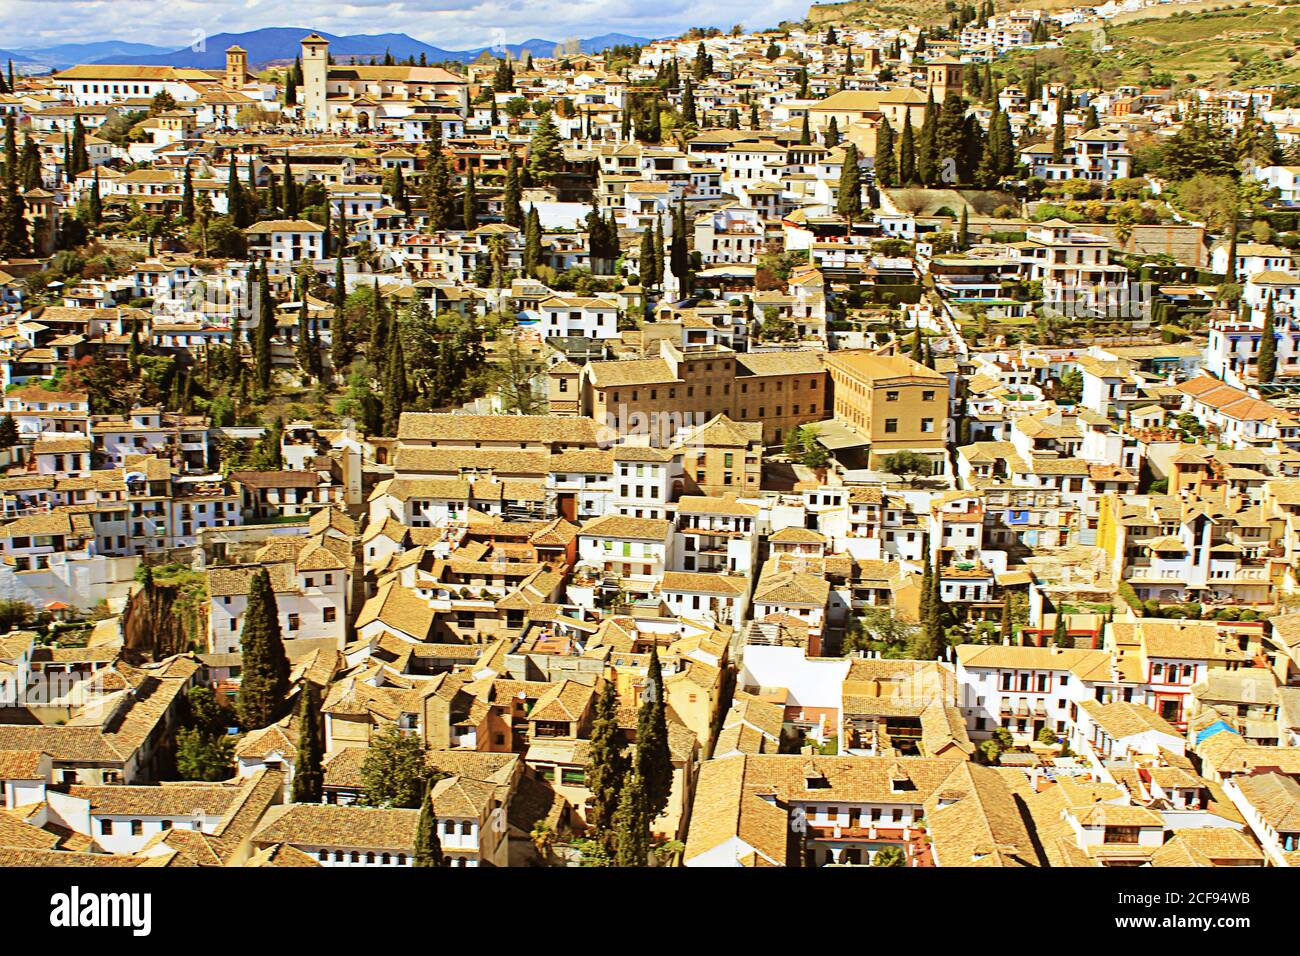 View of the old town in Alhambra Spain Stock Photo